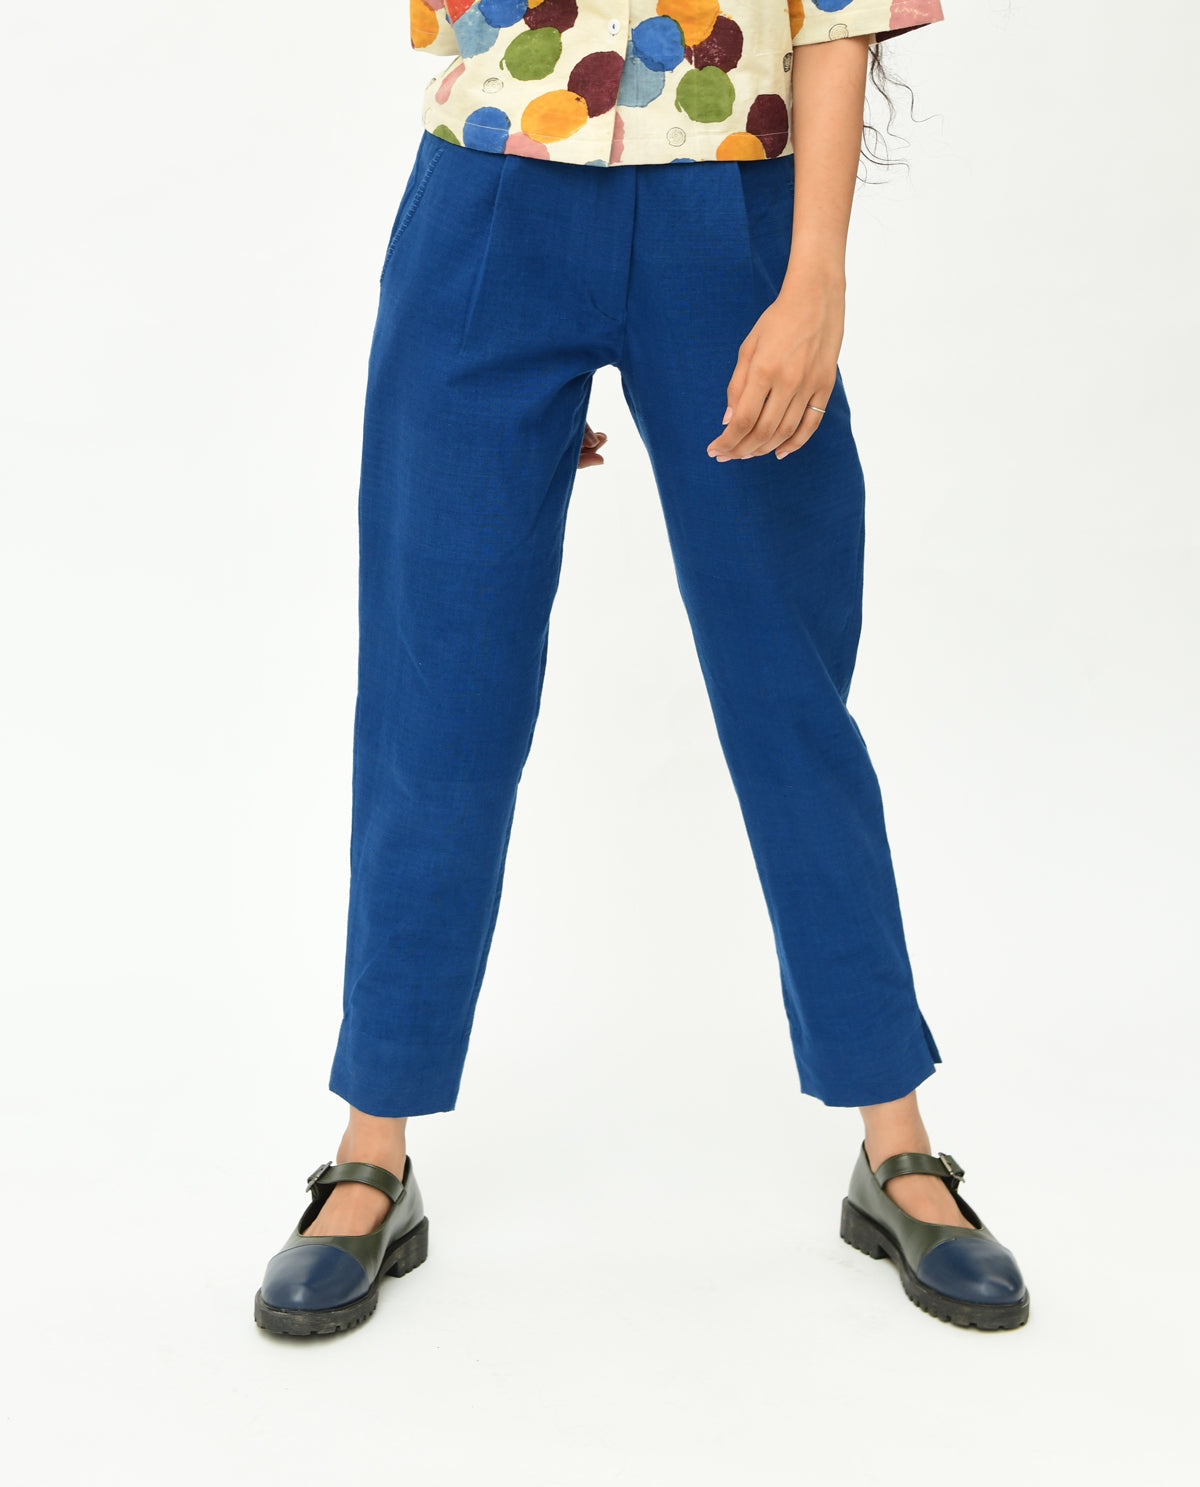 Indigo Blue Solid Pants at Kamakhyaa by Rias Jaipur. This item is 100% Organic Cotton, Blue, Casual Wear, Handspun, Handwoven, Pants, Relaxed Fit, Solids, Void, Womenswear